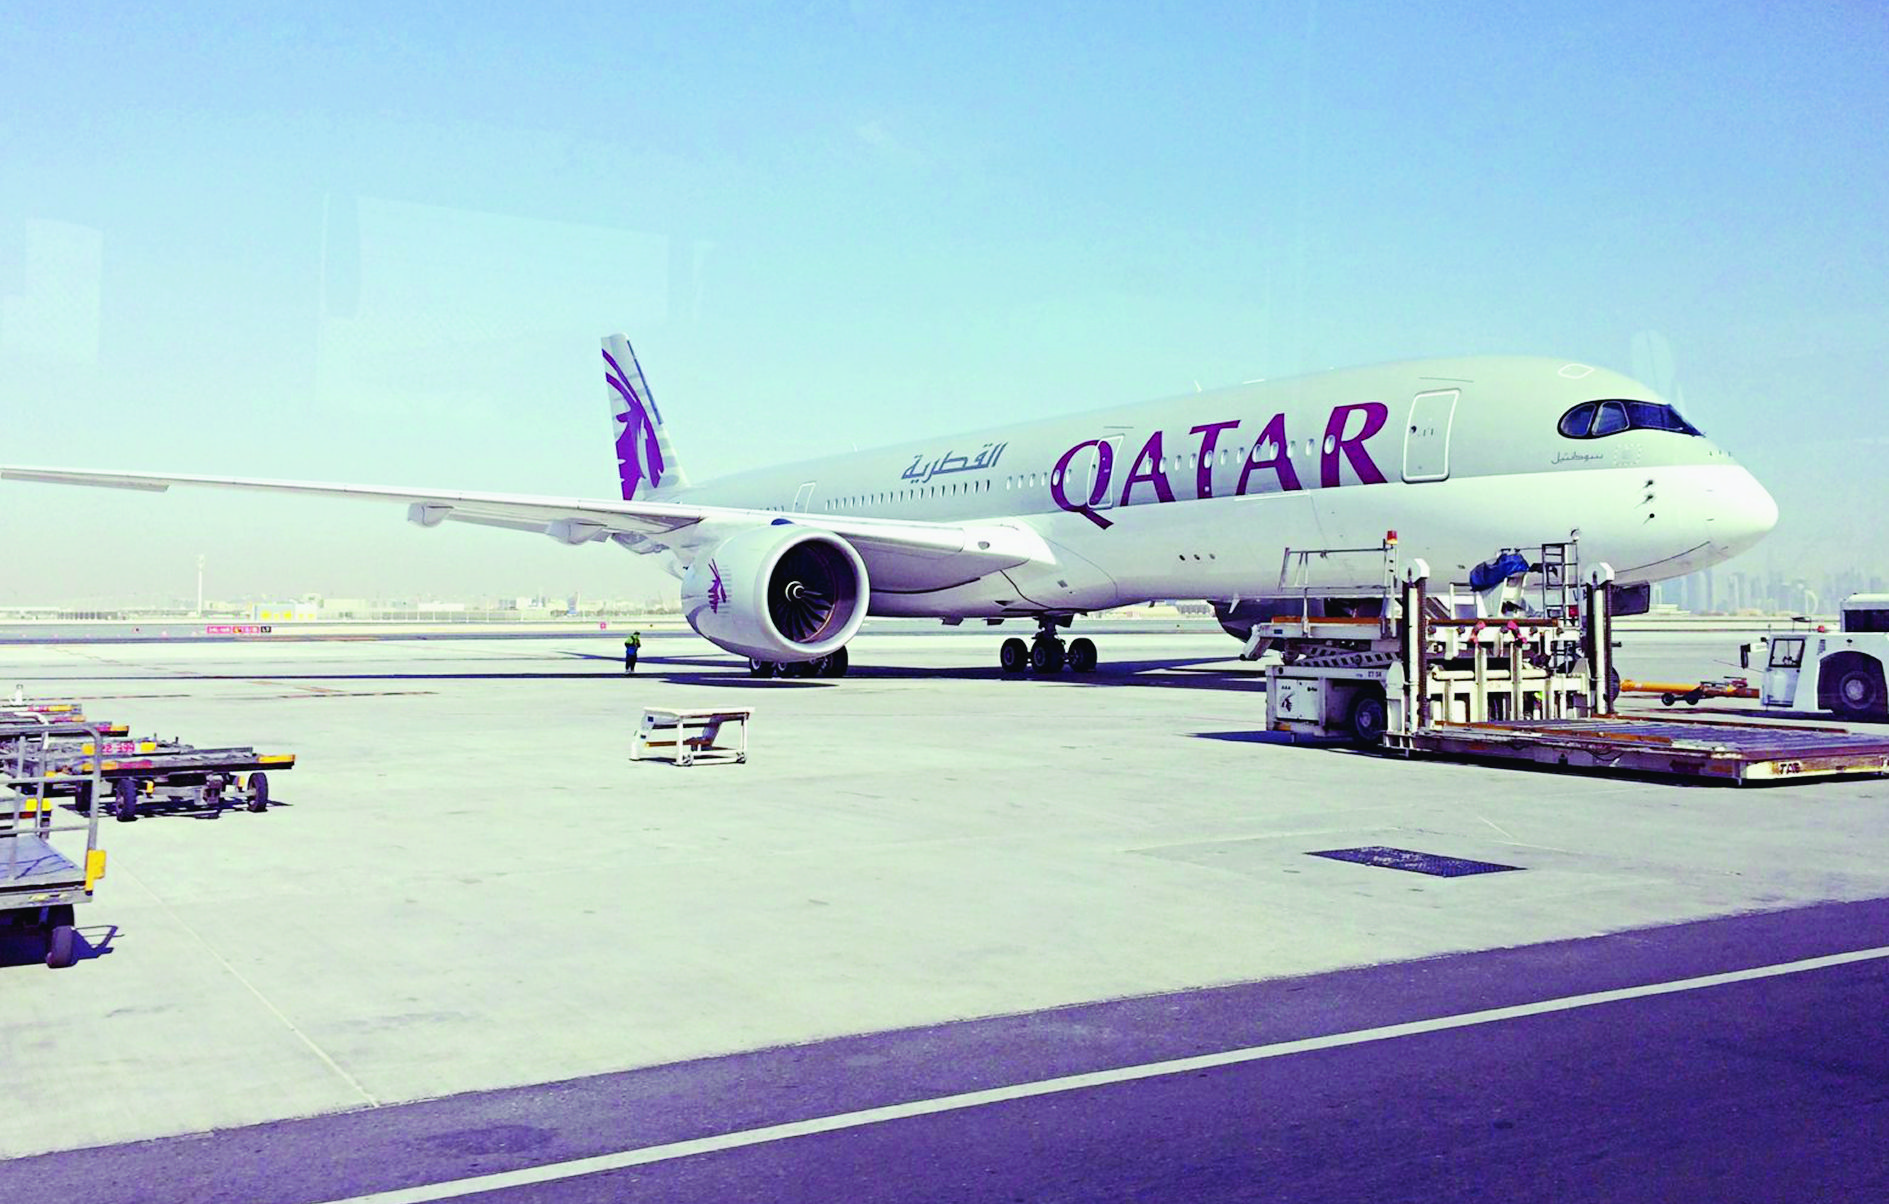 A parked Qatari plane in Hamad International Airport (HIA) in Doha, Qatar, Tuesday, June 6, 2017. Qatar's foreign minister says Kuwait is trying to mediate a diplomatic crisis in which Arab countries have cut diplomatic ties and moved to isolate his energy-rich, travel-hub nation from the outside world. (AP Photo/Hadi Mizban) Qatar